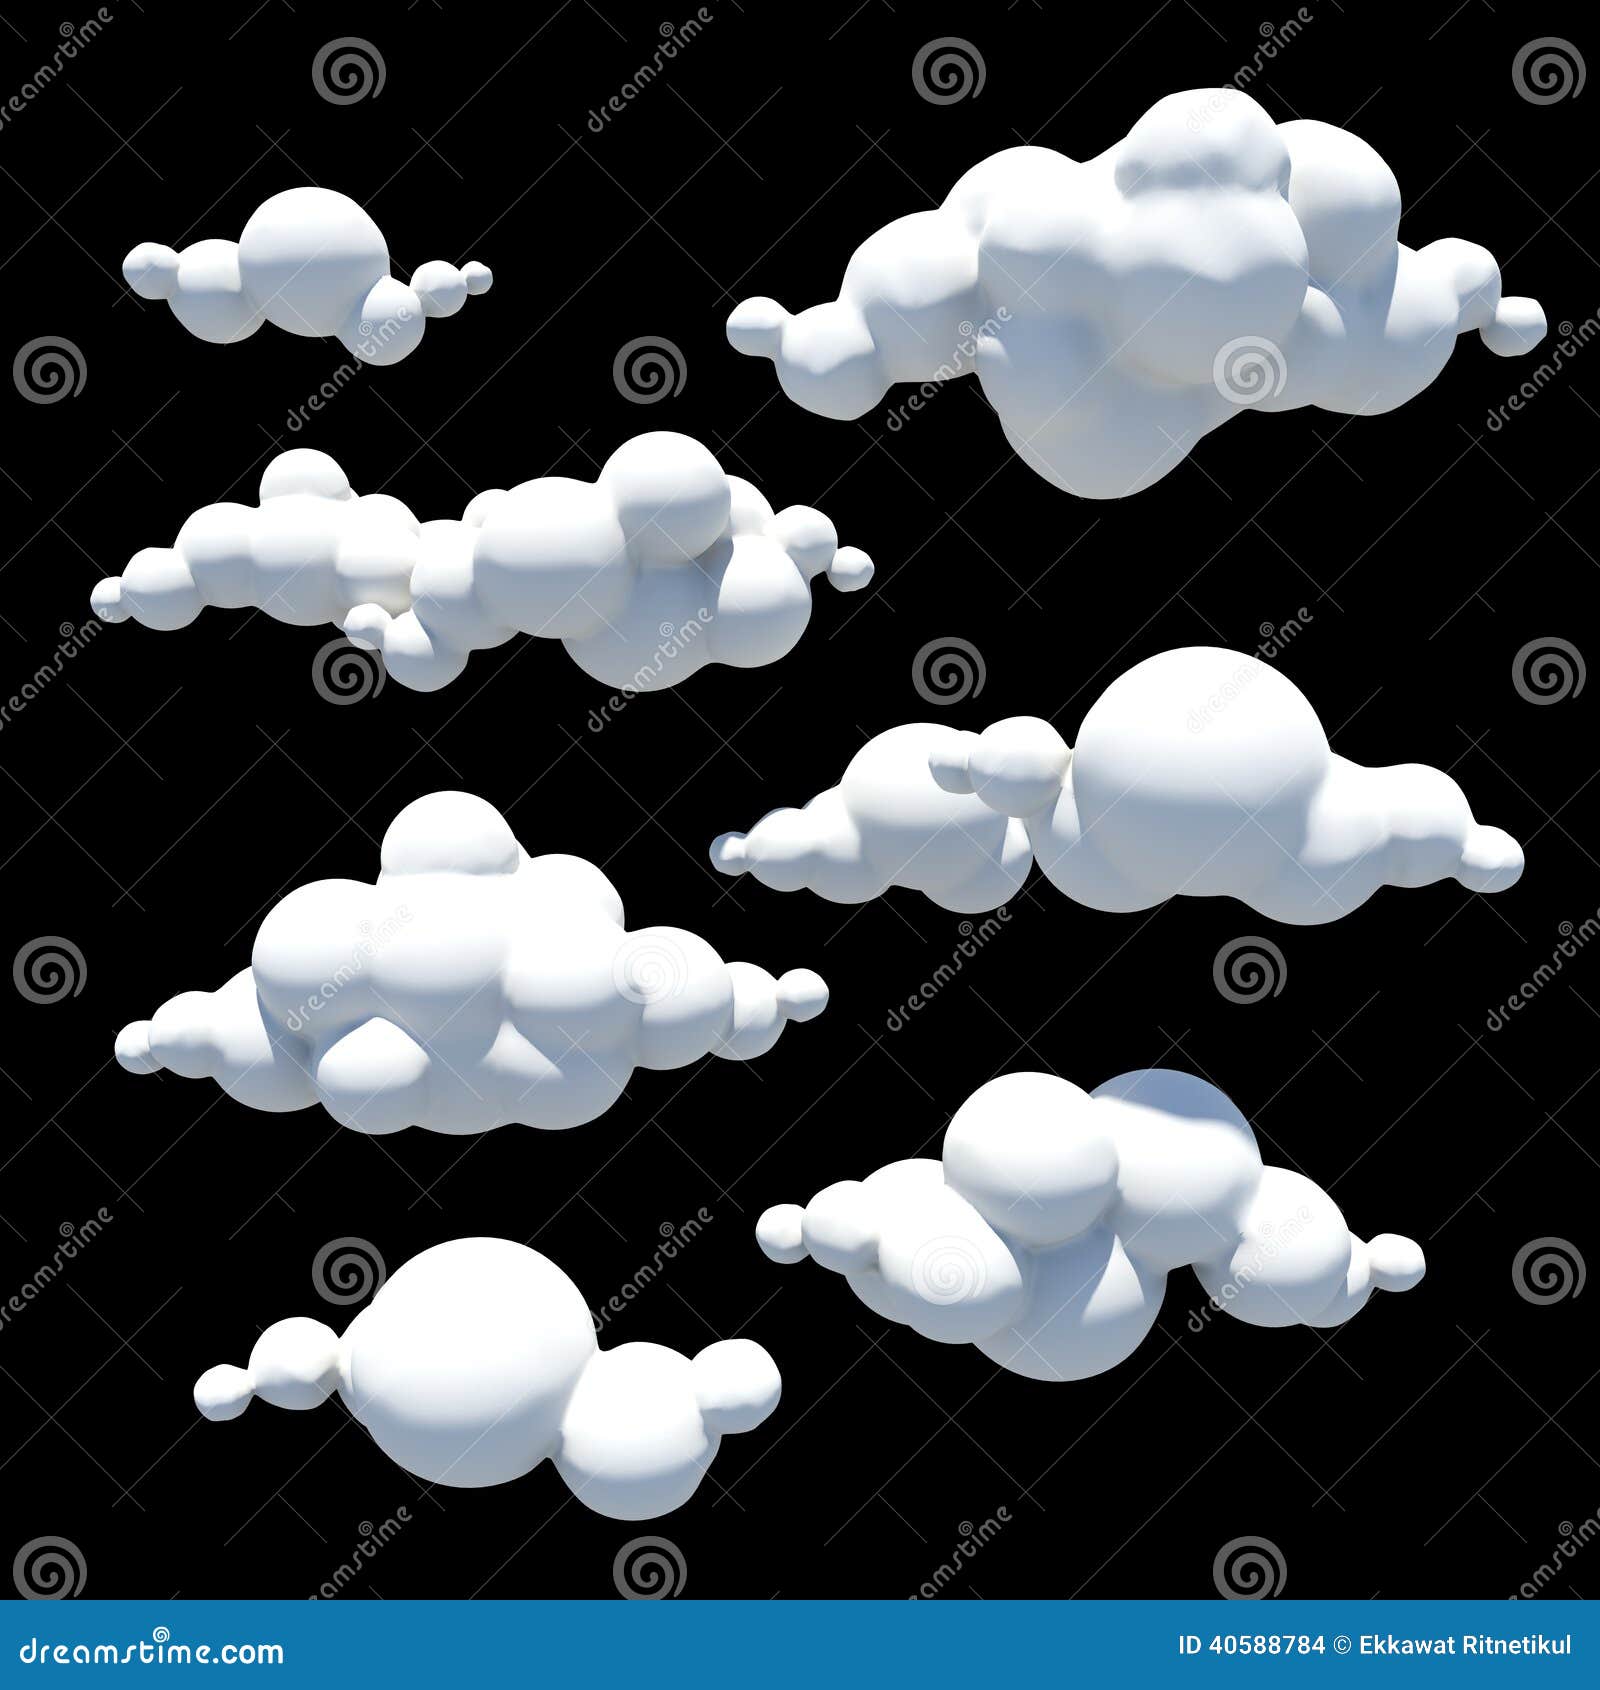 Cartoon Clouds, Design Element, PNG Transparent Background Stock Photo -  Illustration of cloudy, pattern: 40588784